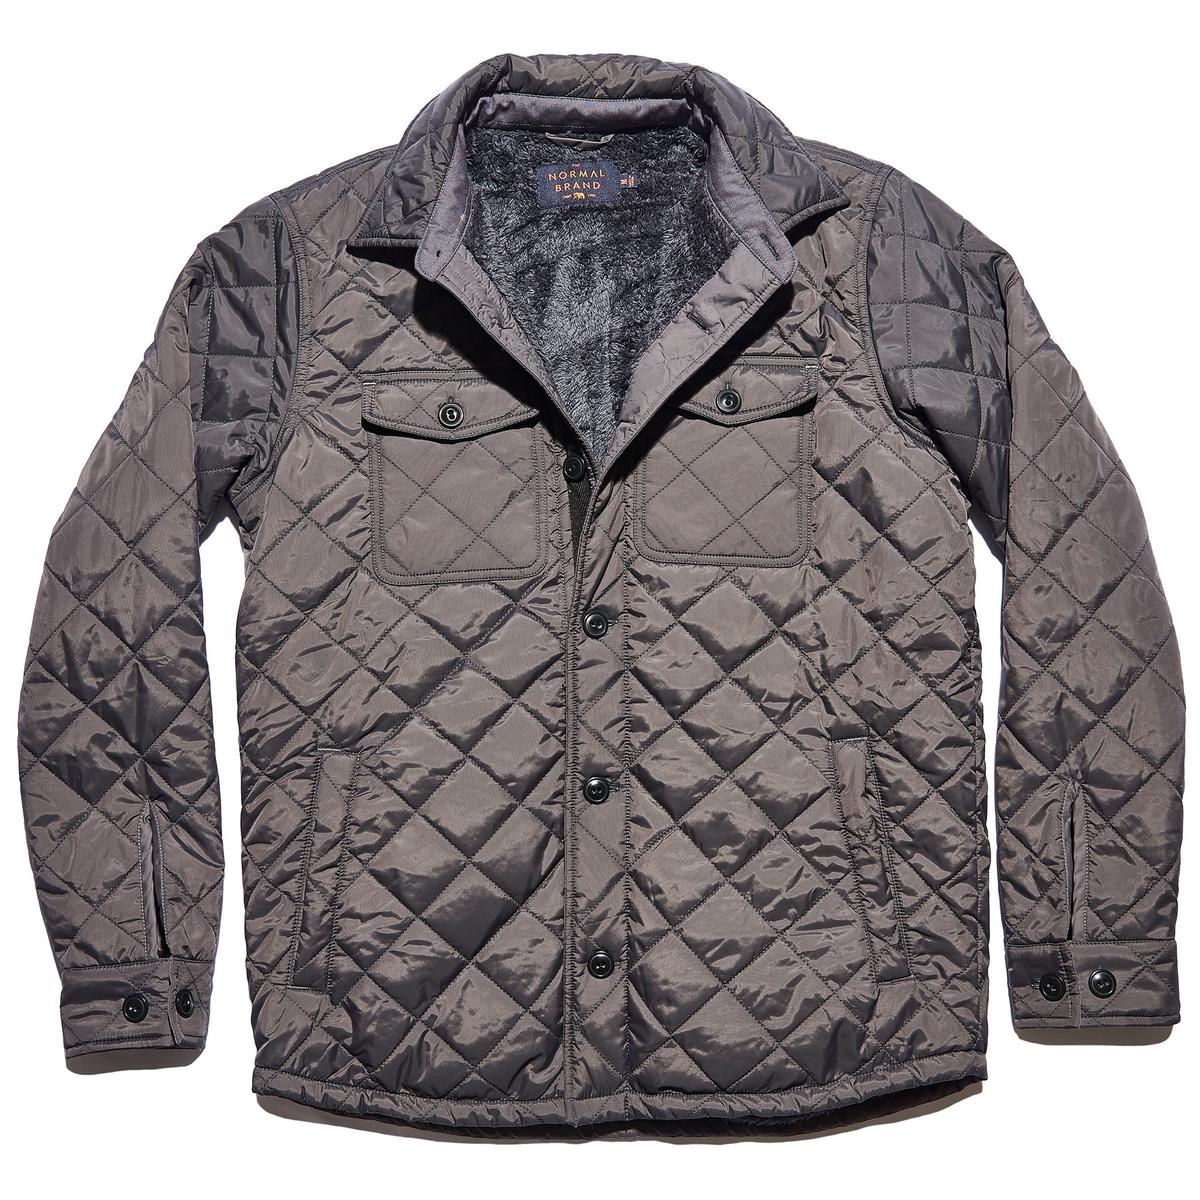 The Normal Brand Men's Quilted Sherpa Lined Shacket - Sun & Ski Sports